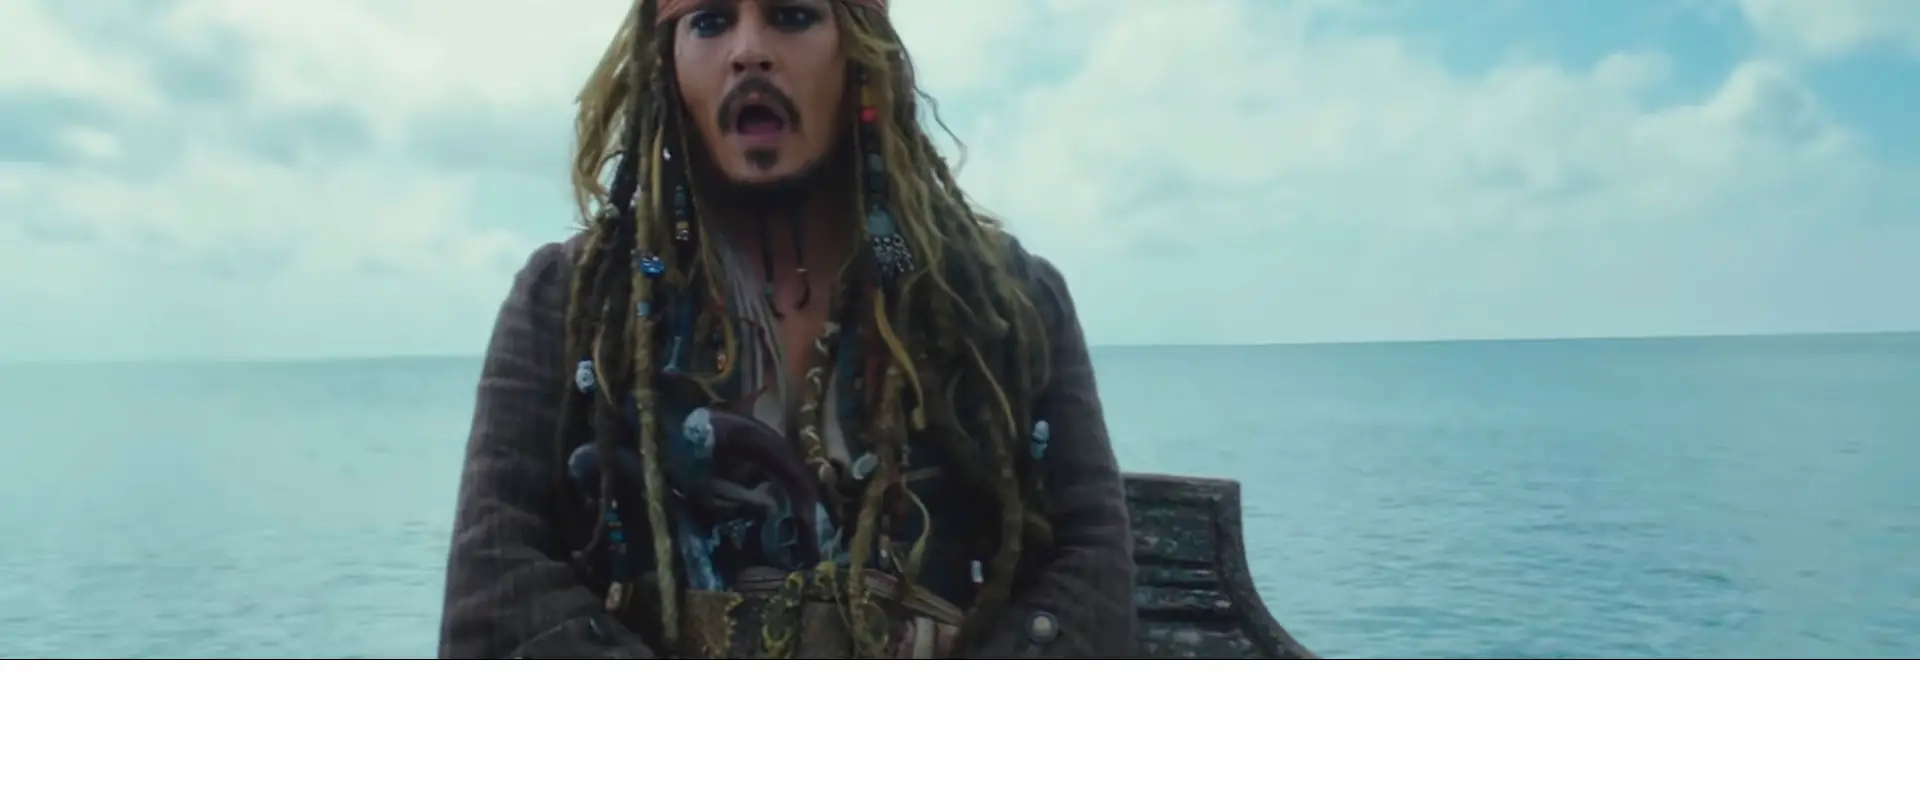 Download Film Pirates Of The Caribbean 5 Full Movie